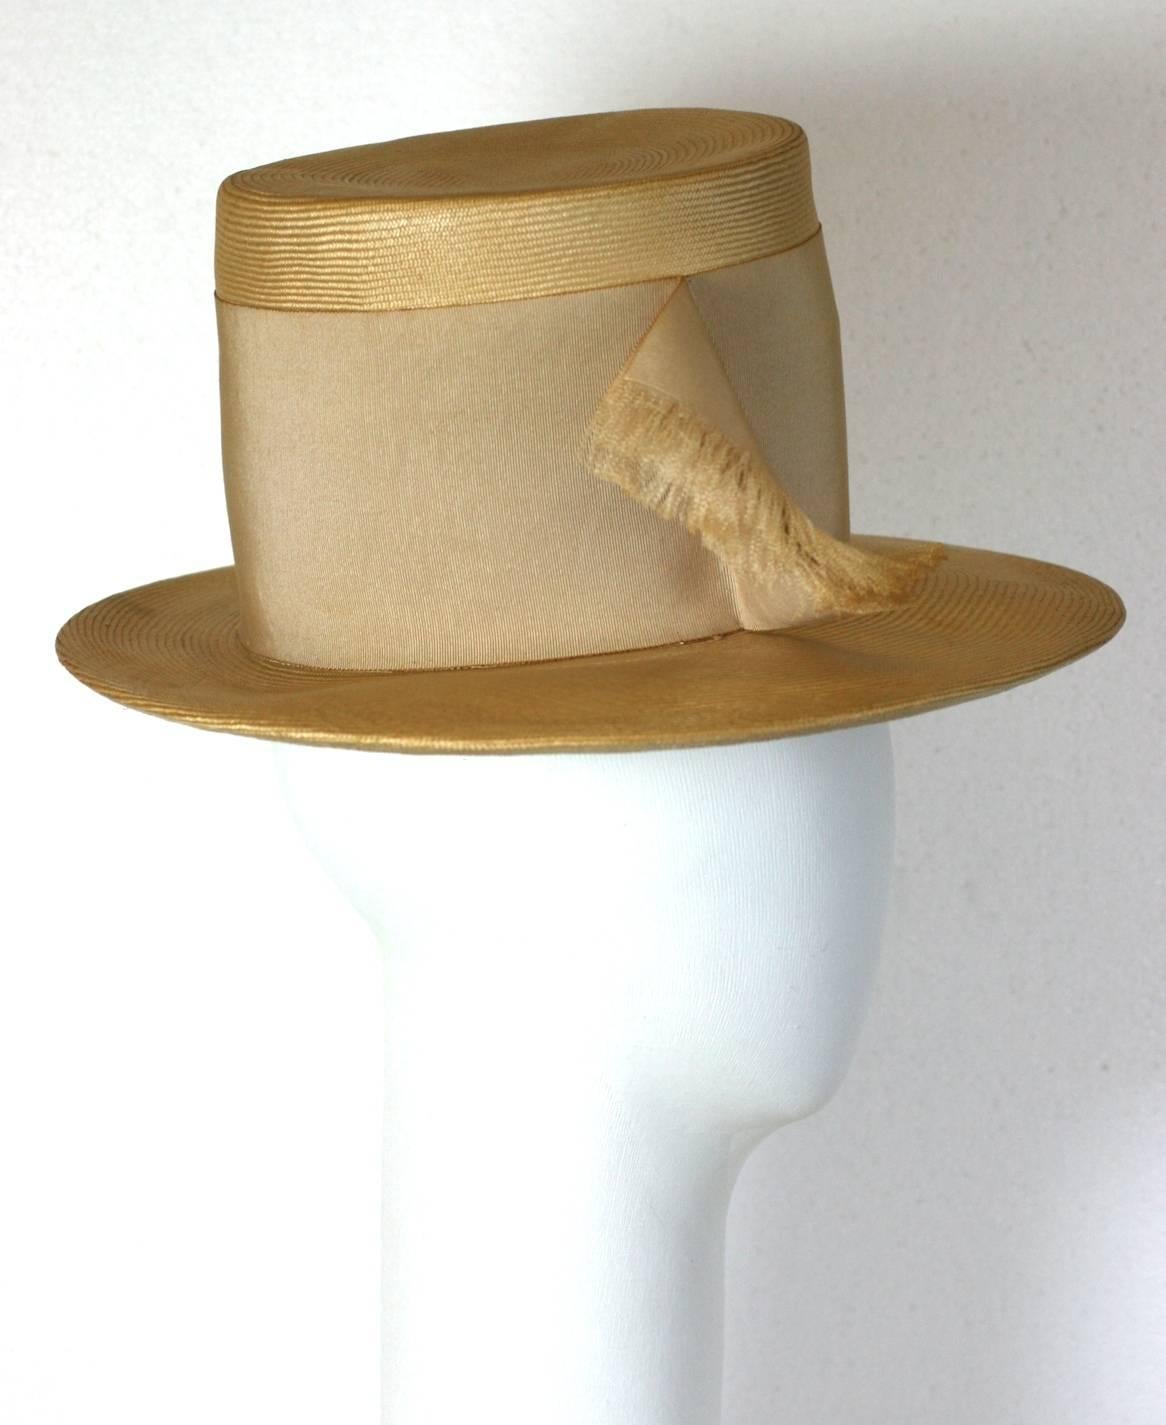 Charming, finely woven straw hat with graduated brim and high crown with wide grosgrain ribbon trim. 1960's Italy.
Crown 5.5